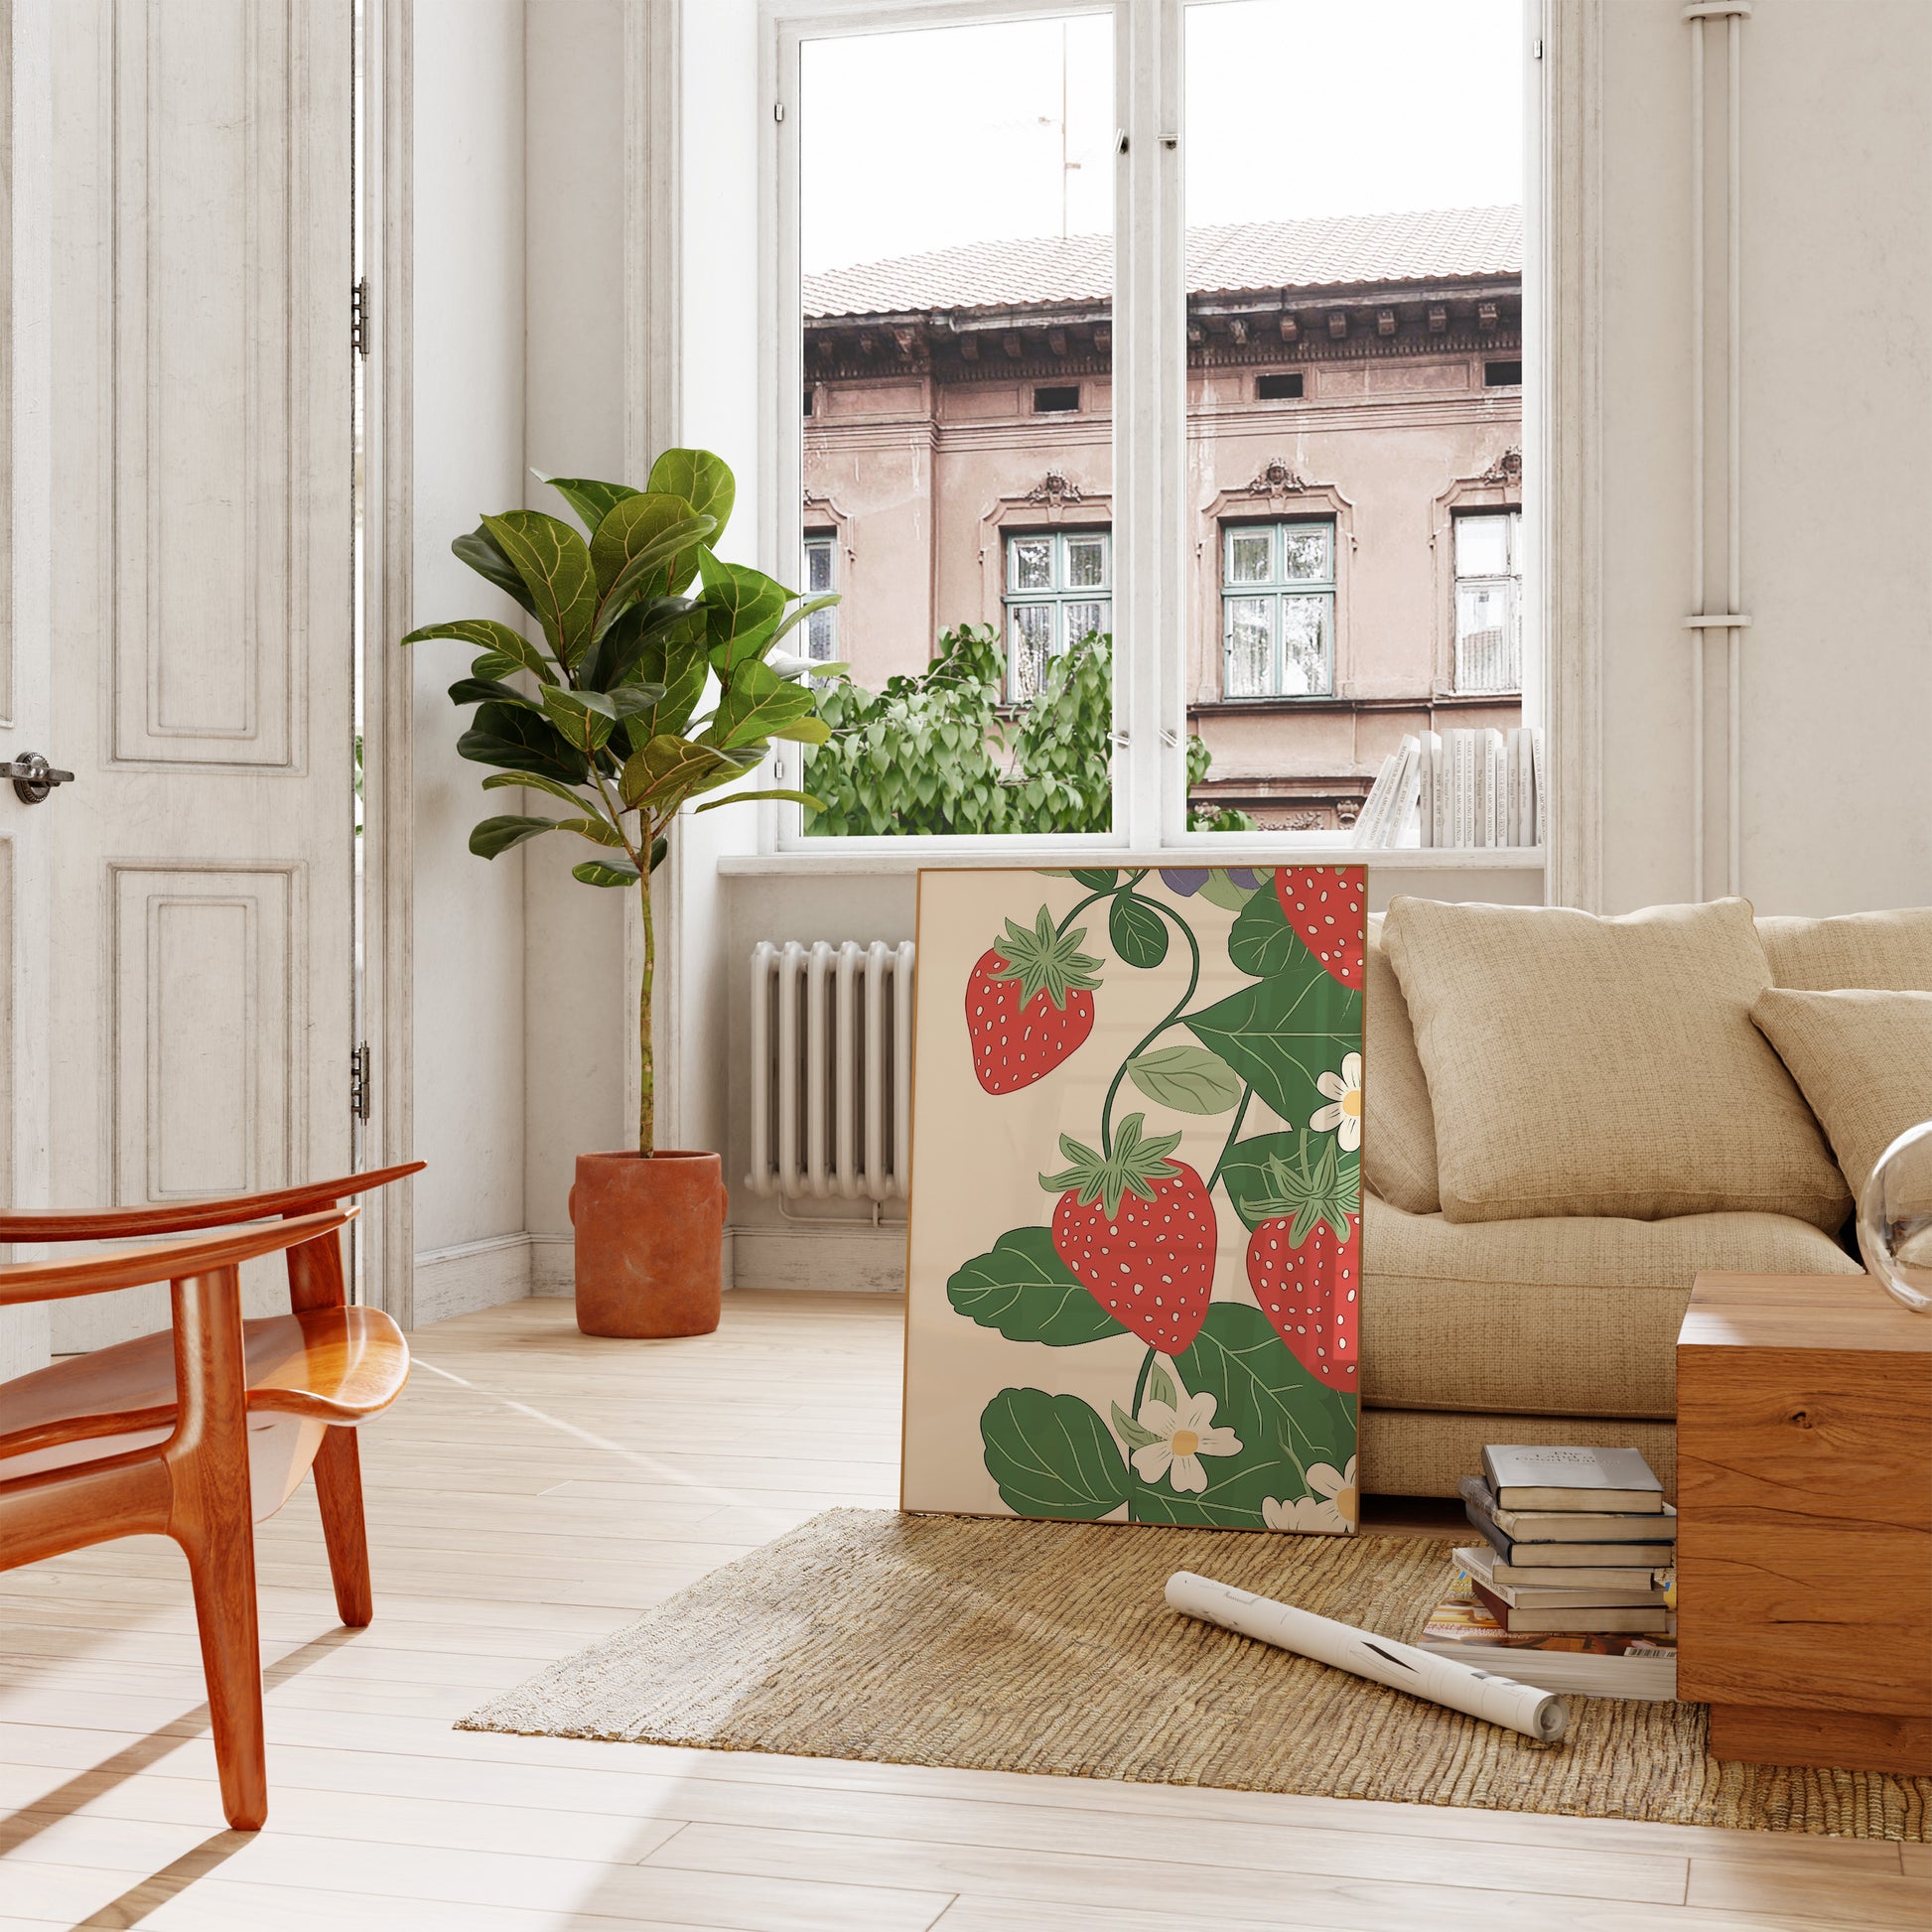 A cozy living room with a modern sofa, wooden furniture, and a plant-themed decor.